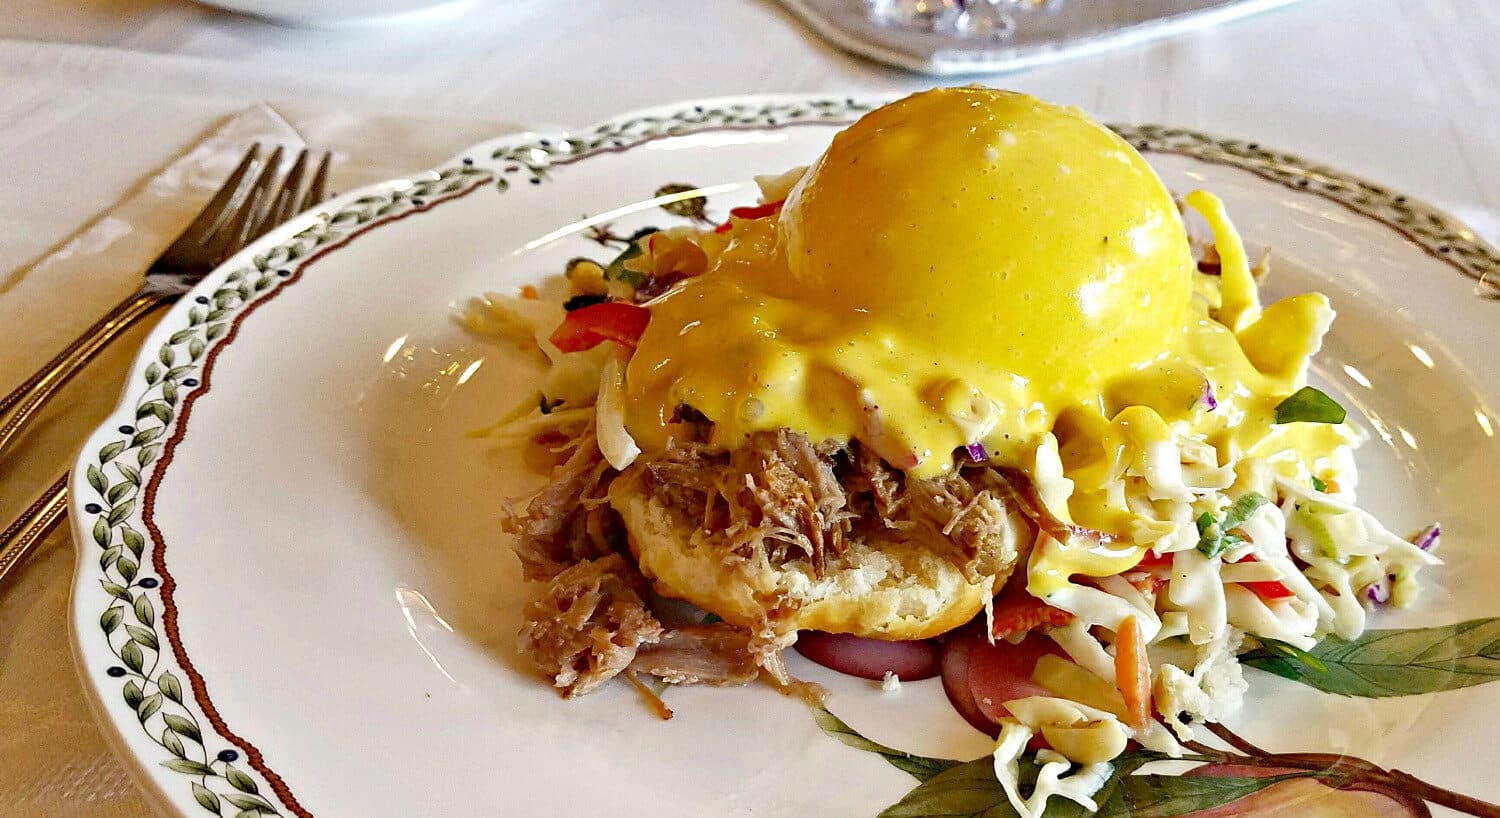 Barbeque Benedict - bbq meat on a biscuit with coleslaw and hollandaise sauce. 